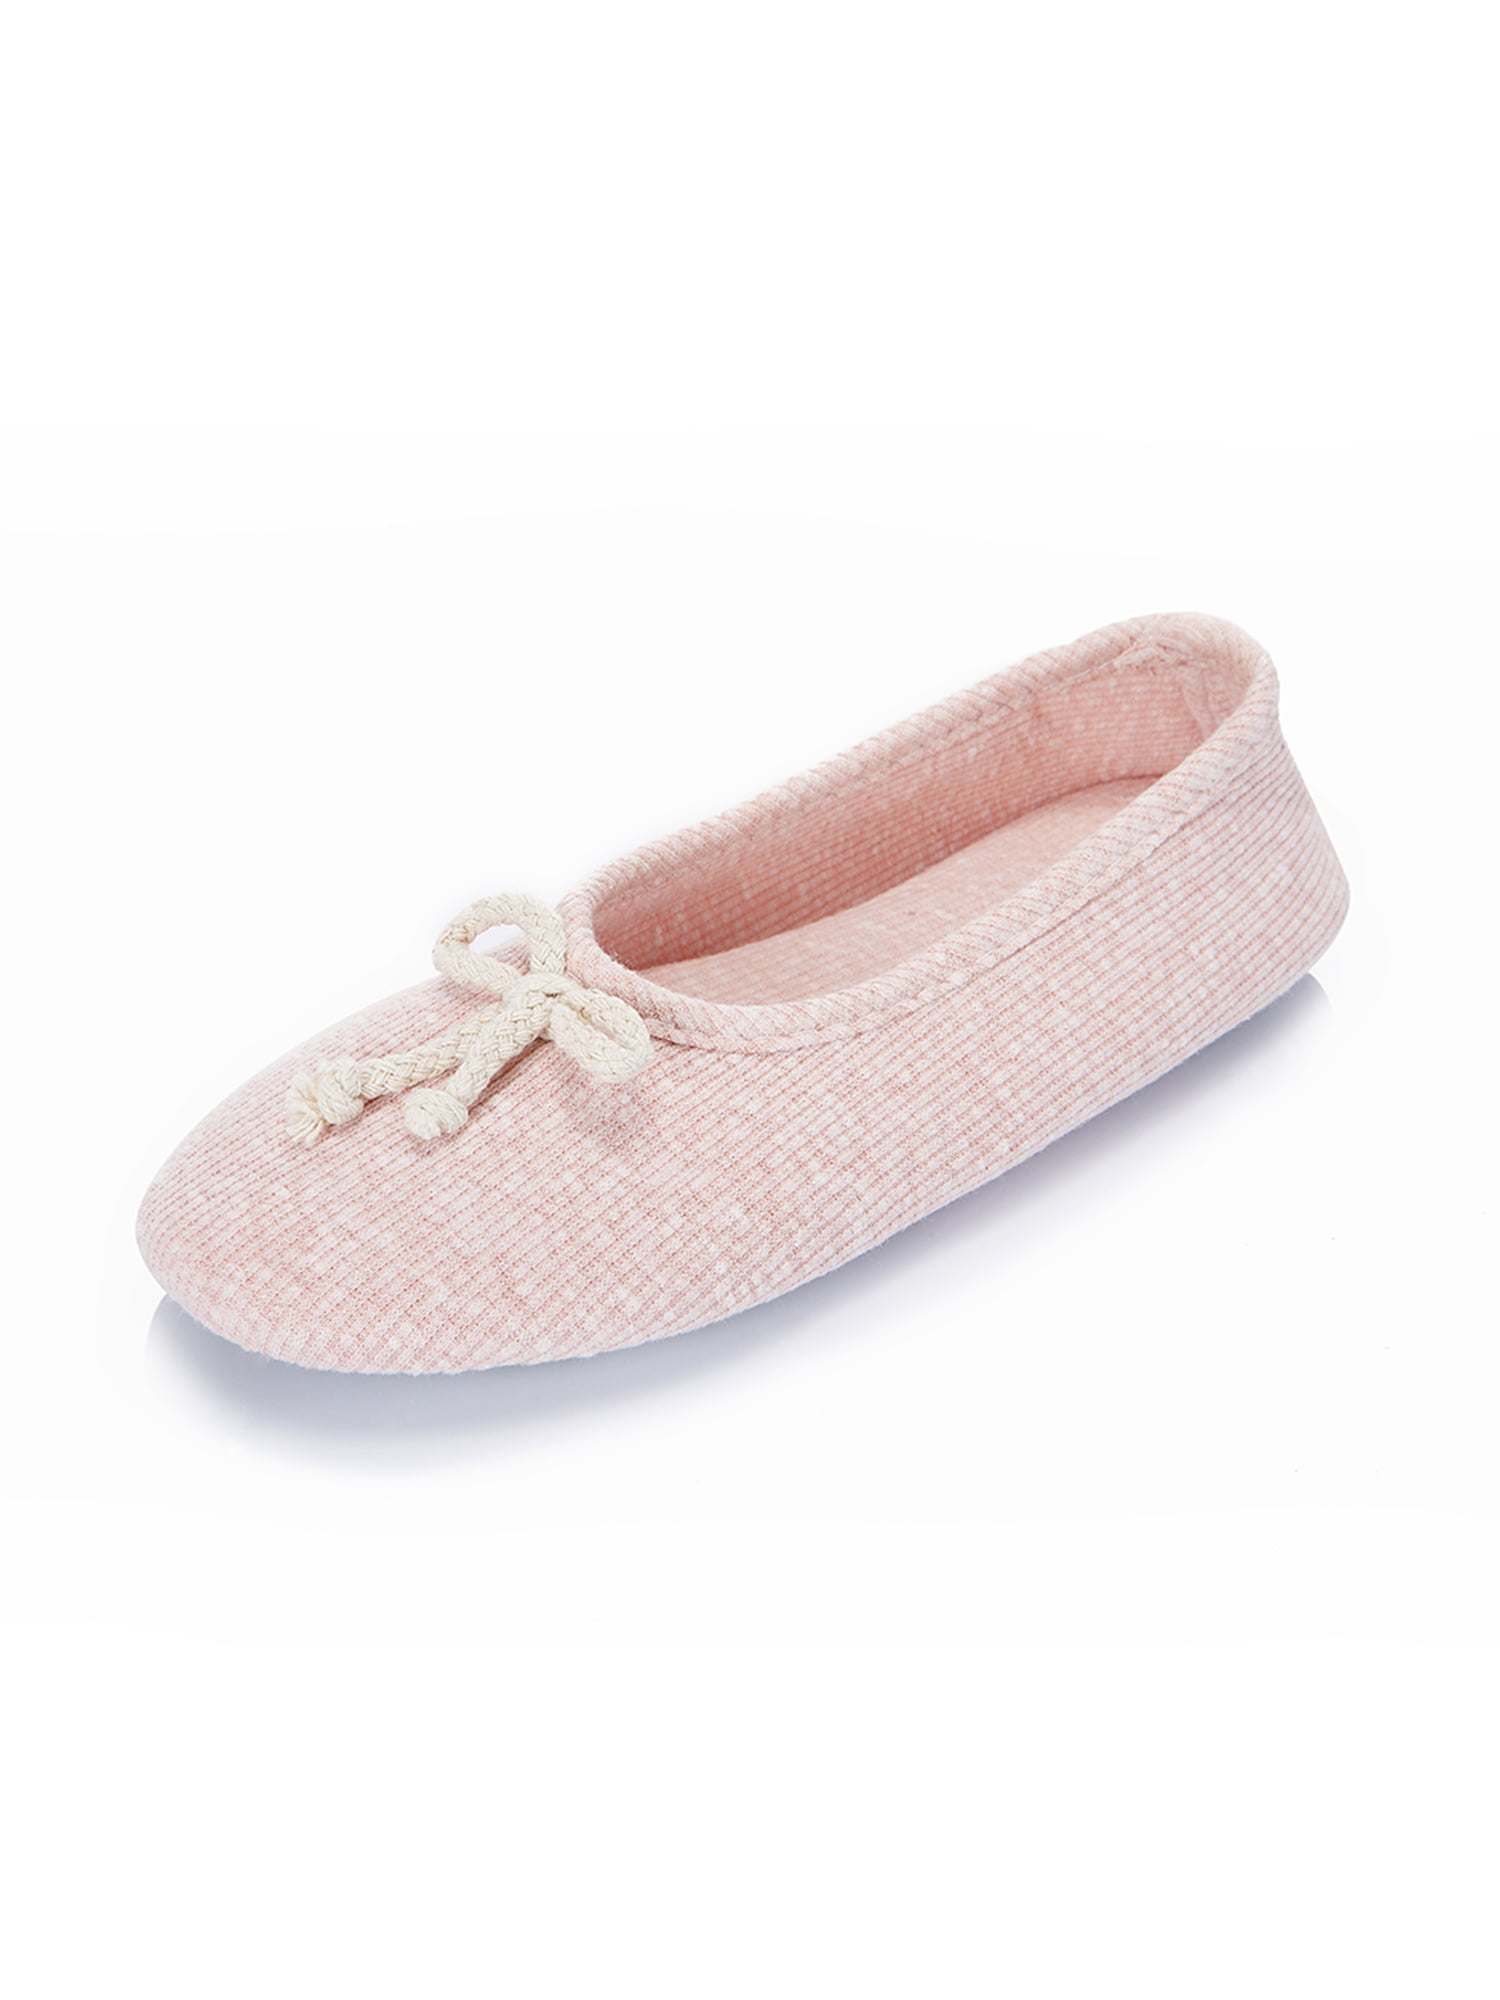 SAYFUT Ladies House Slippers Classic Terry Ballerina Slipper With Soft ...